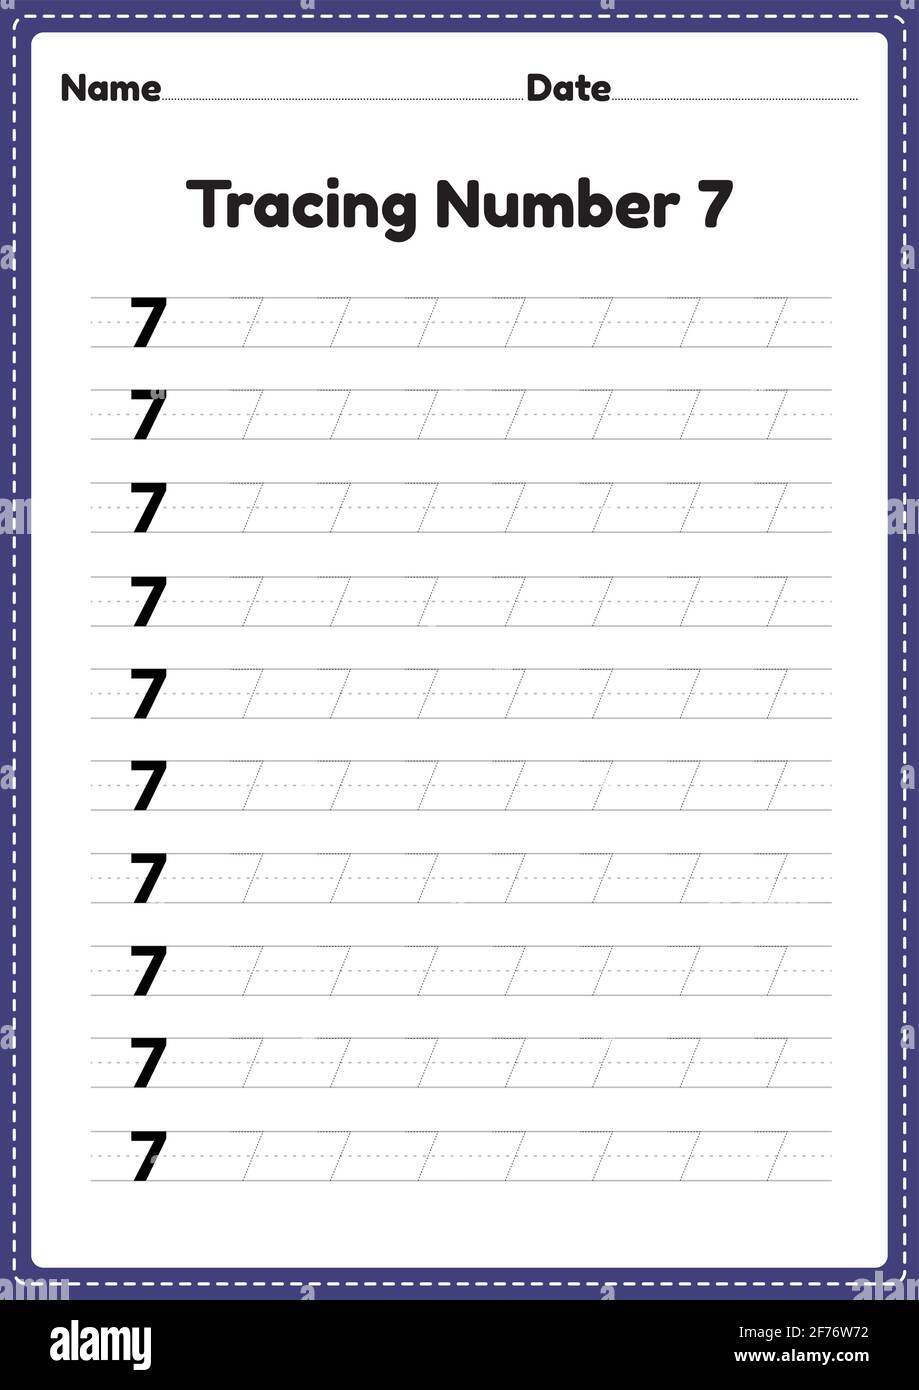 Tracing number 7 worksheet for kindergarten and preschool kids for educational handwriting practice in a printable page. Stock Vector